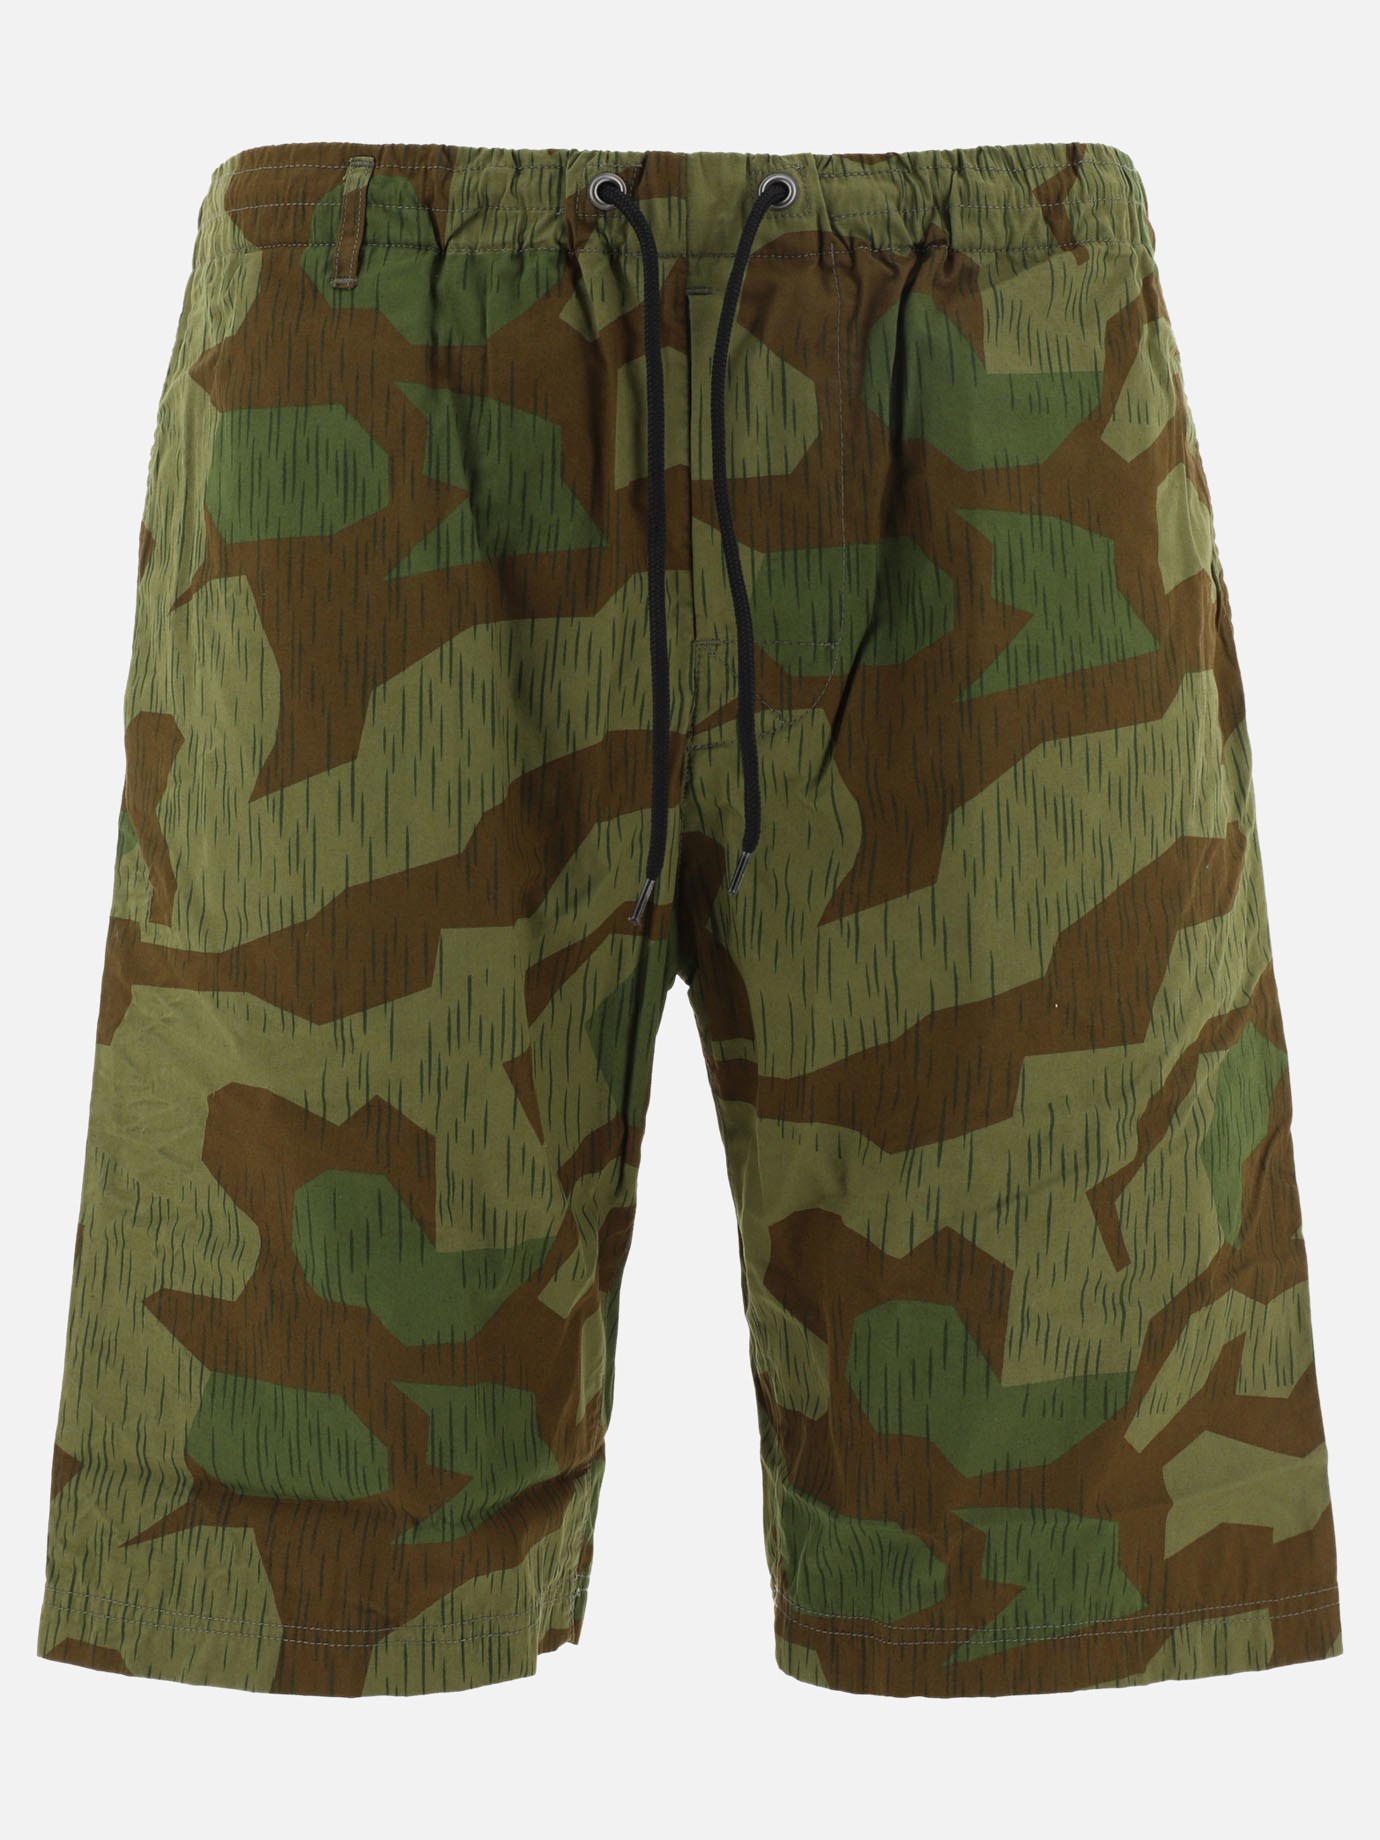 Short  Easy Shorts  by Mountain Research